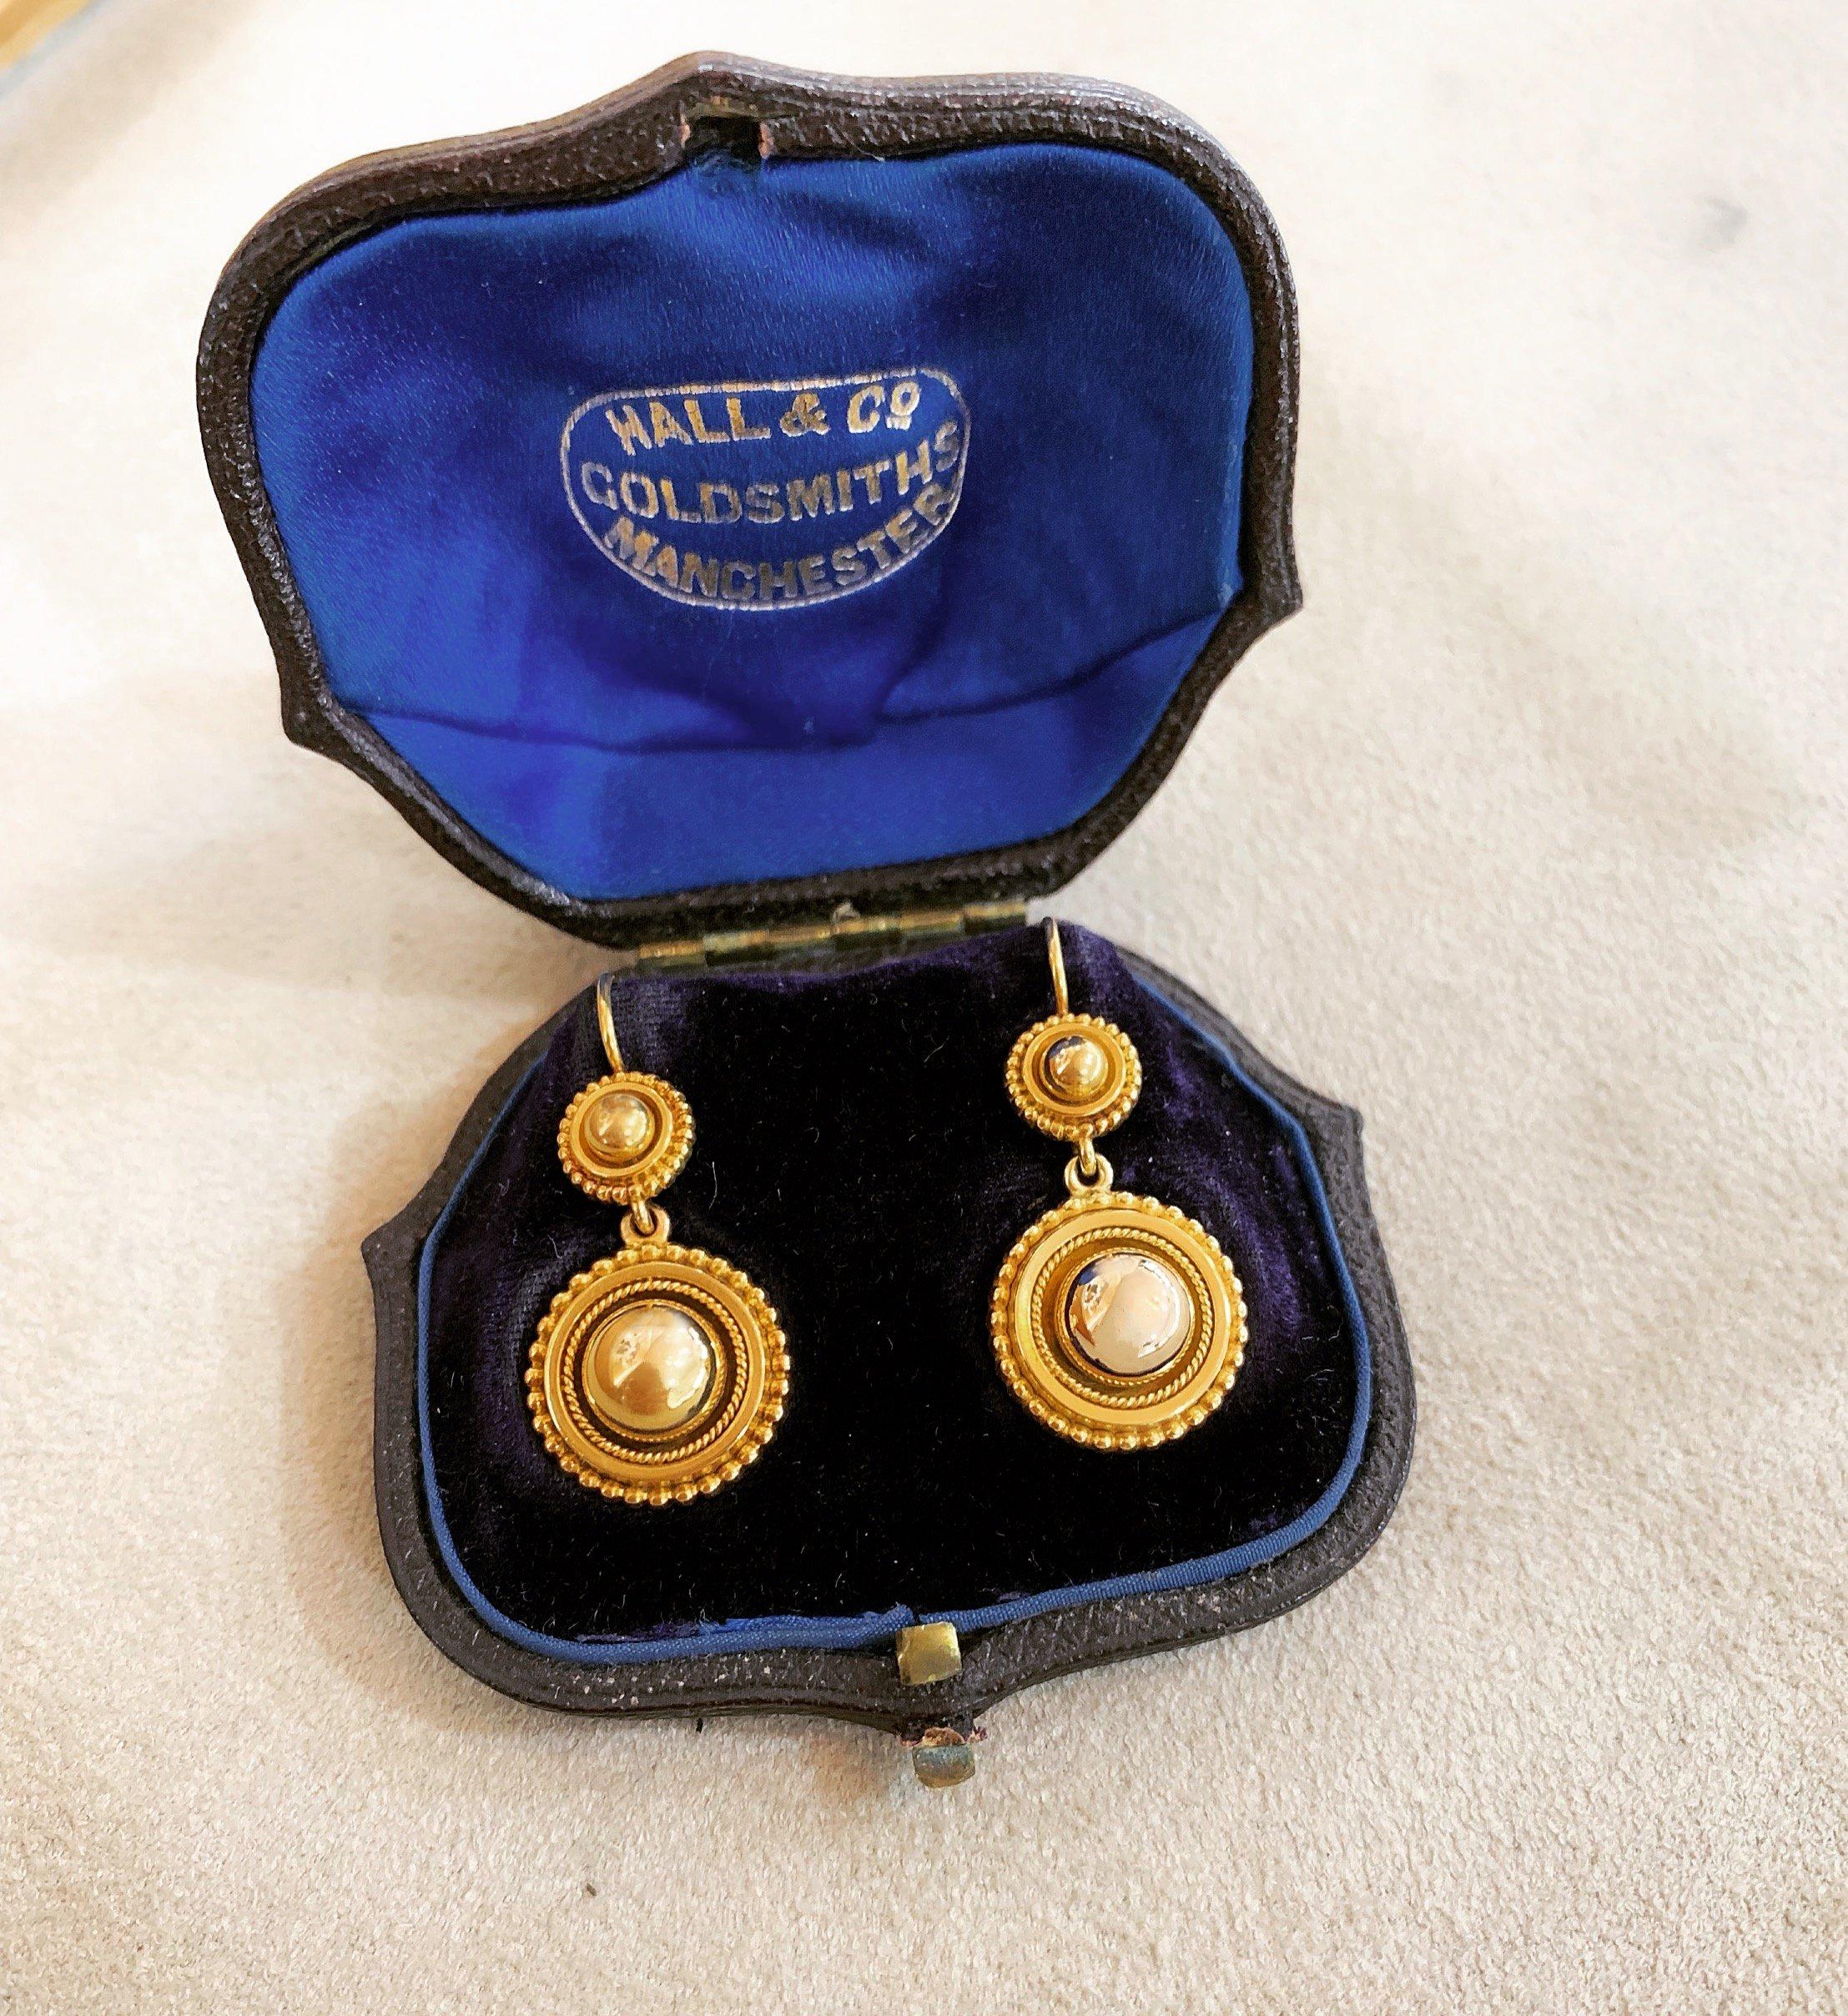 Original Victorian Era Antique 15ct Gold double dome disc drop earrings with ball edge decoration English Origins. 

These beautiful earrings, truly are just exquisite. Sublime 15ct gold Antique Earrings created in the late Victorian Hall & Co, who